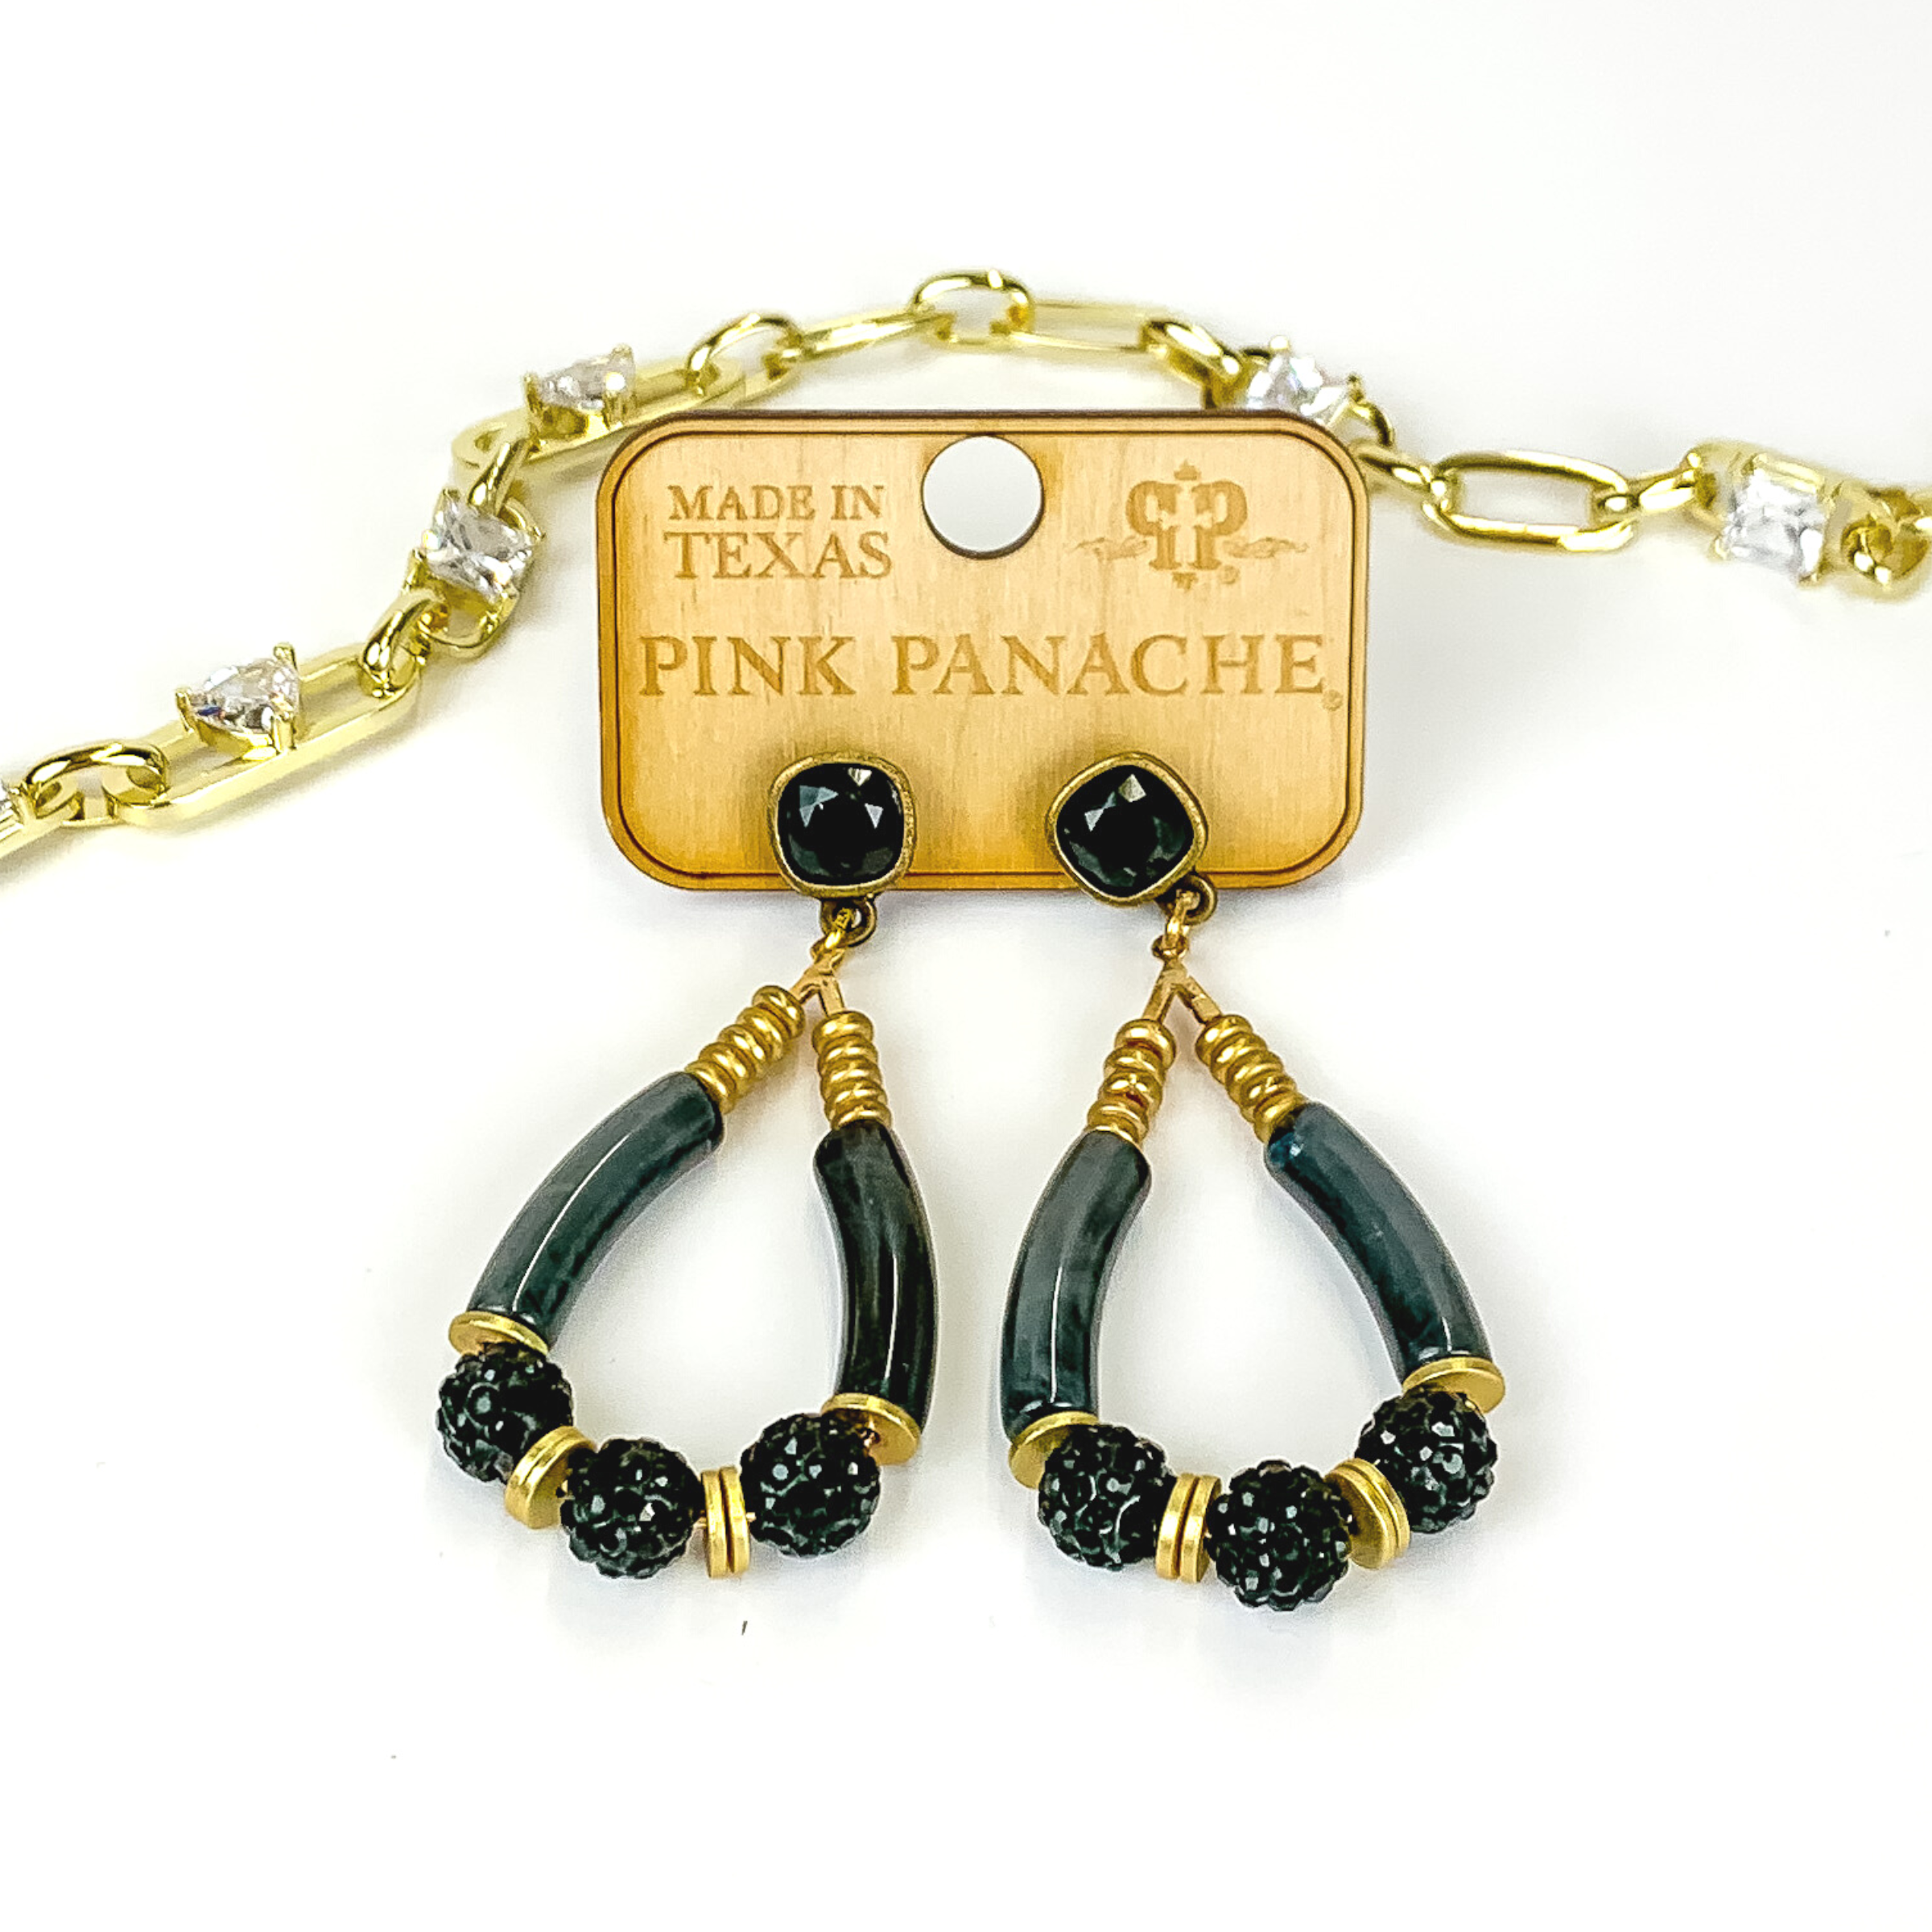 Black square stud earrings with a gold and black beaded teardrop pendant. The pendant includes gold disk beads, black marble tube beads, and black crystal beads. These earrings are pictured on a white background with a gold chain behind the earrings. 